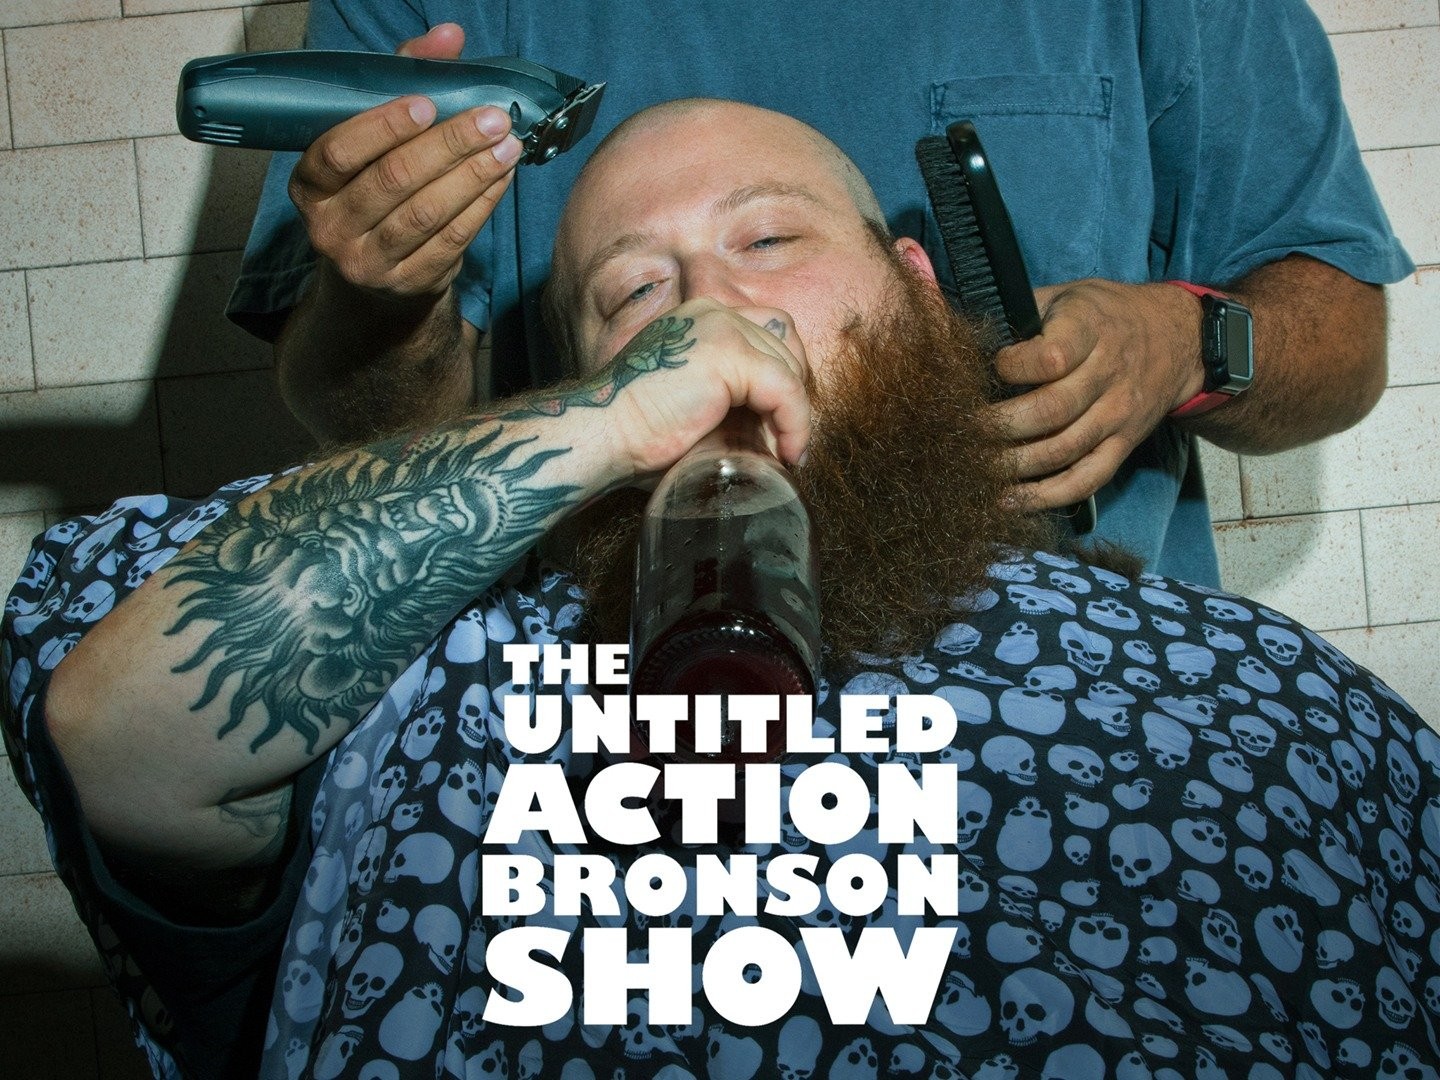 Can Action Bronson Make It as a Late-Night Star? | Vanity Fair